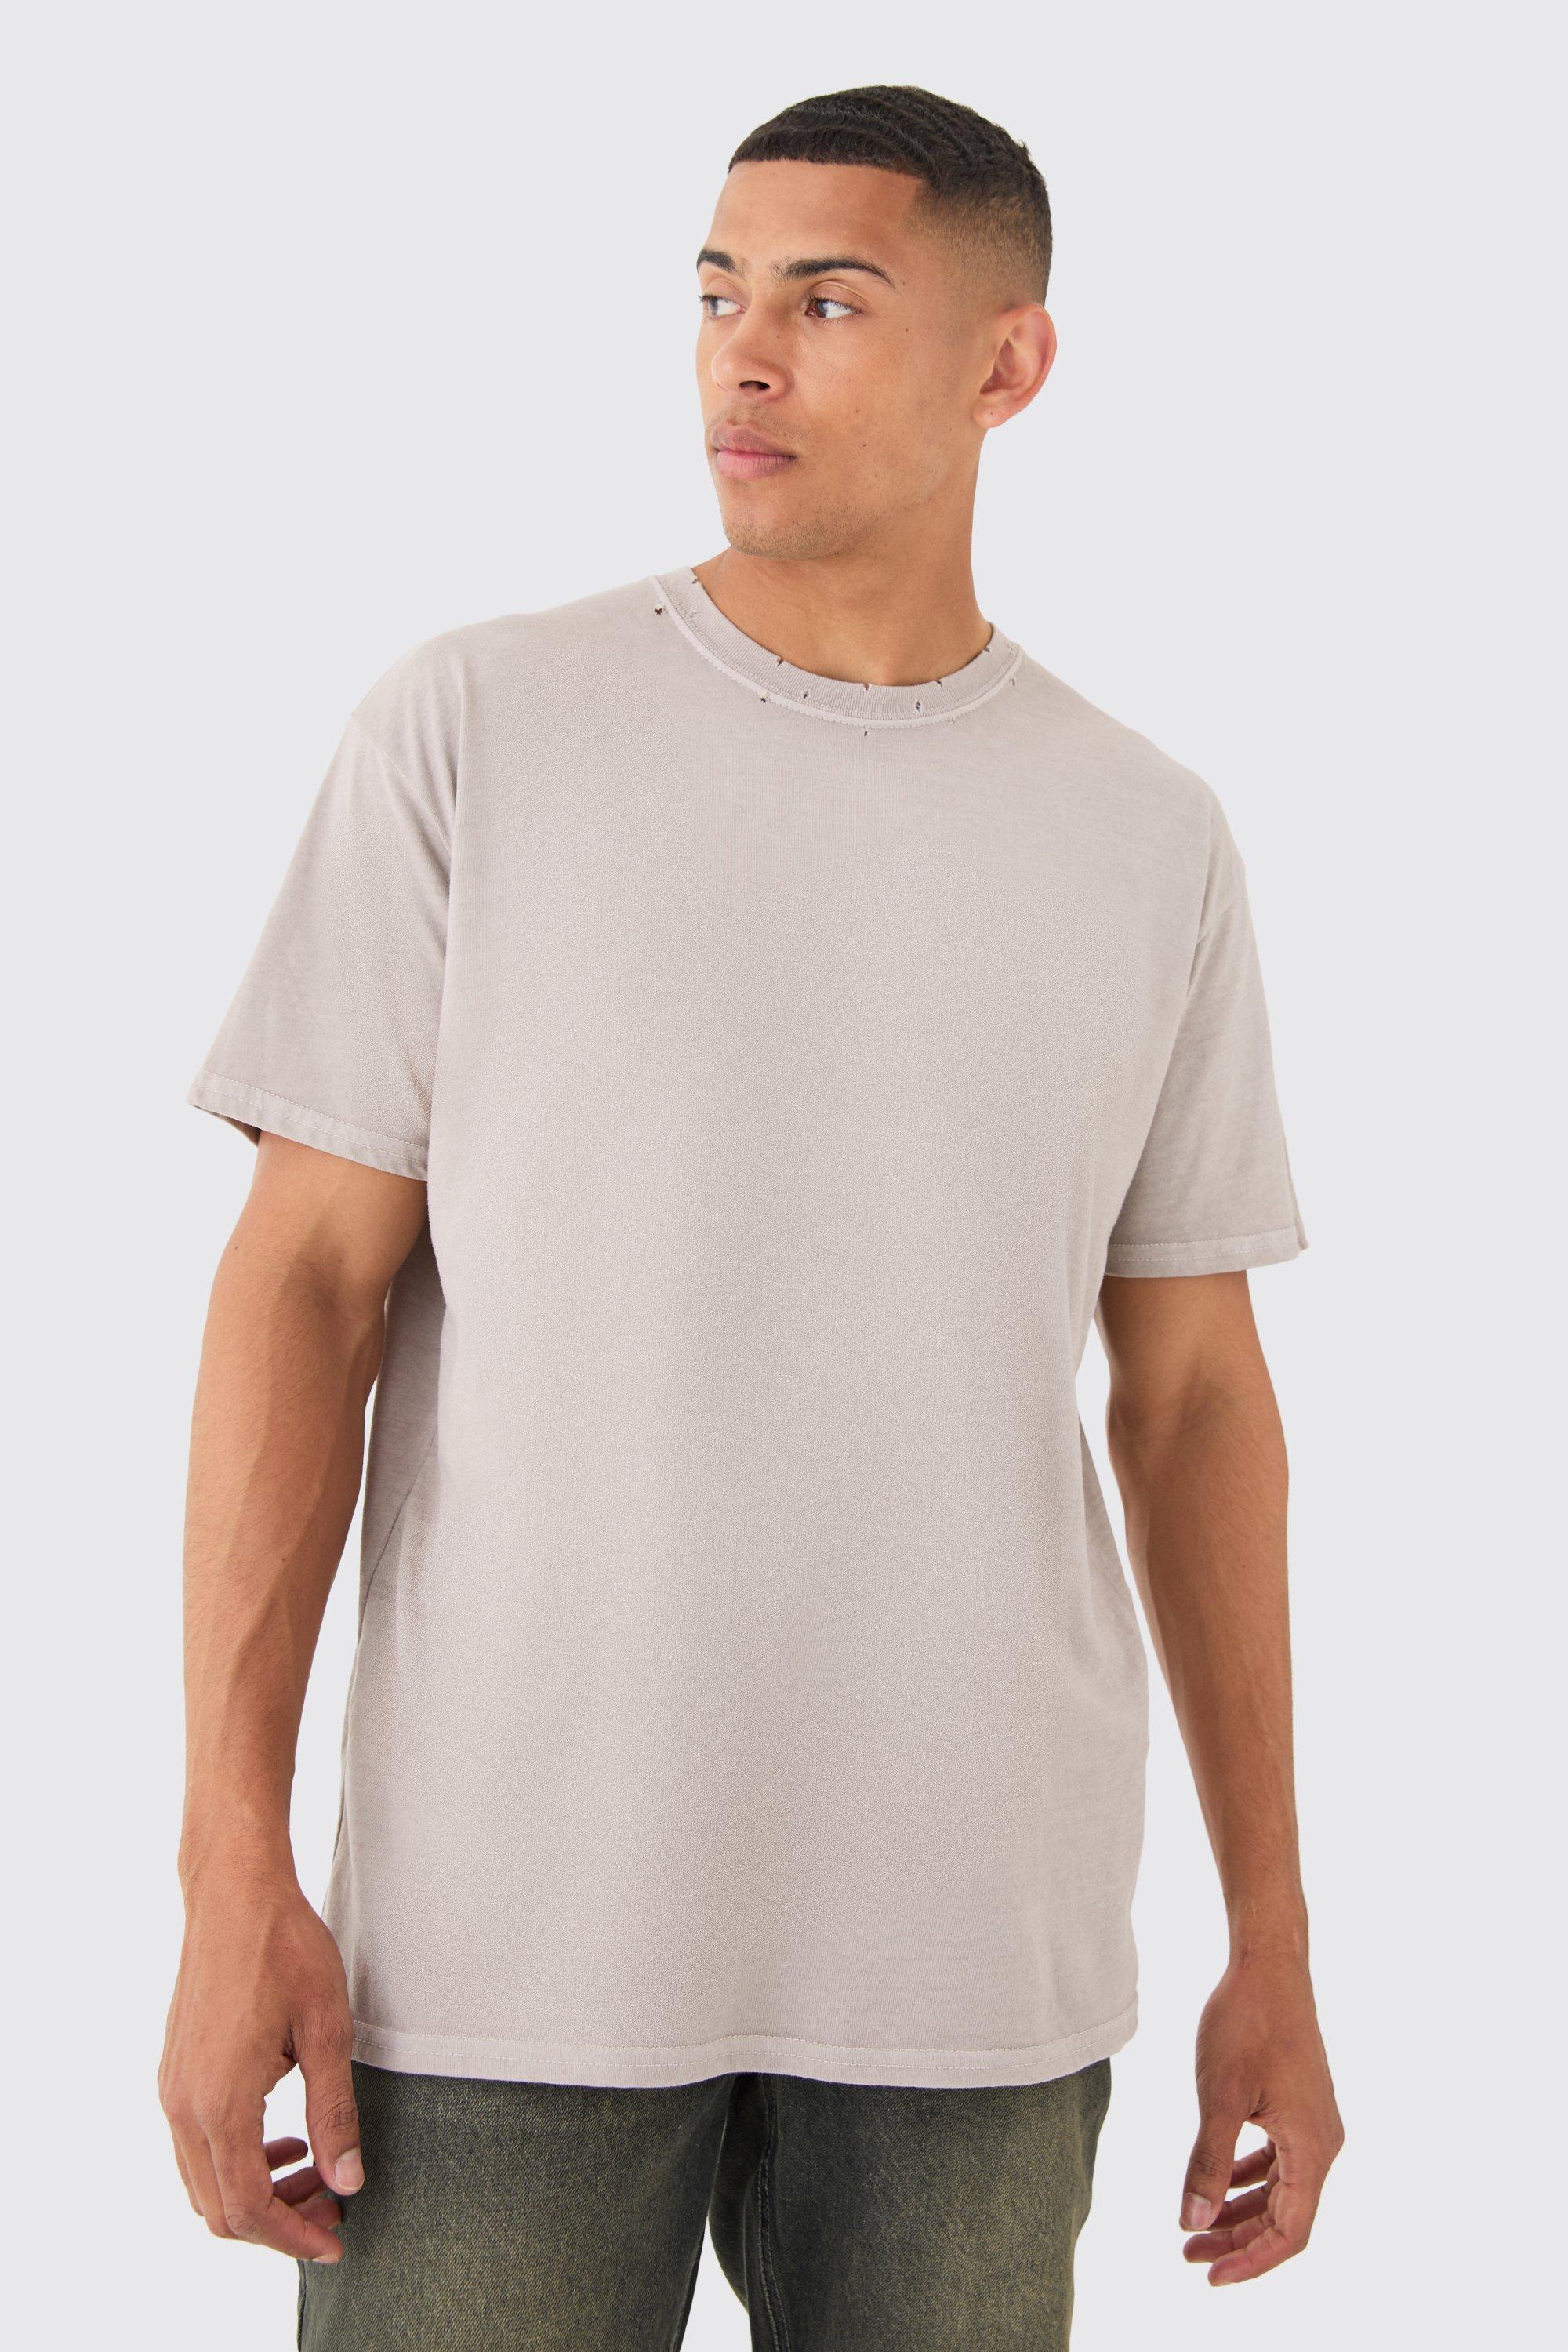 Image of Oversized Distressed Wash T-shirt, Brown